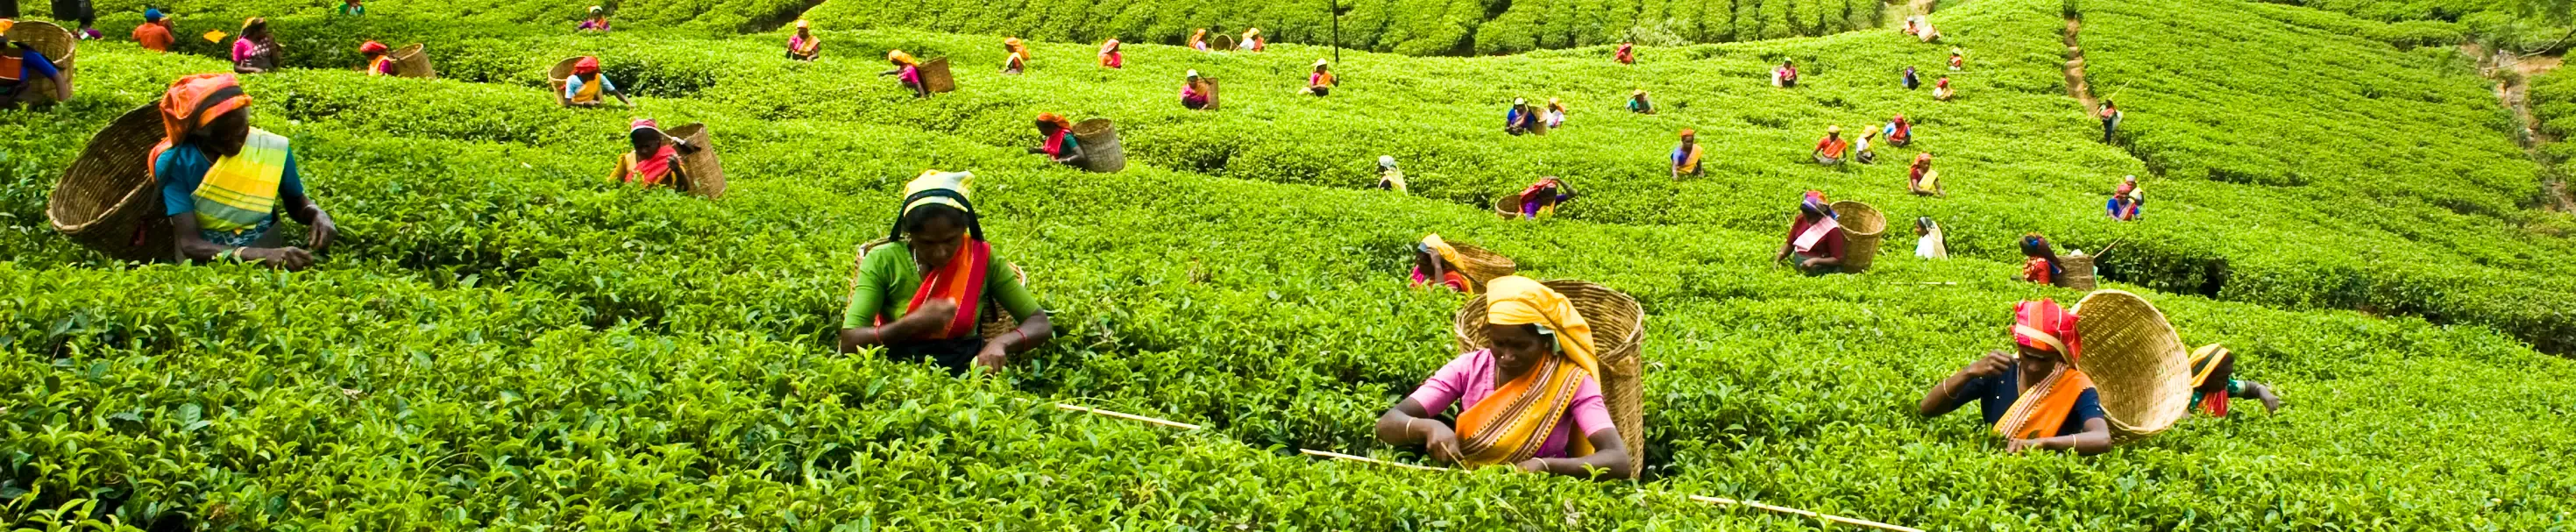 Dilmah-Tea-Garden-Great-Western-Tea-Esate-with-the-factory-in-the-background-complete.webp